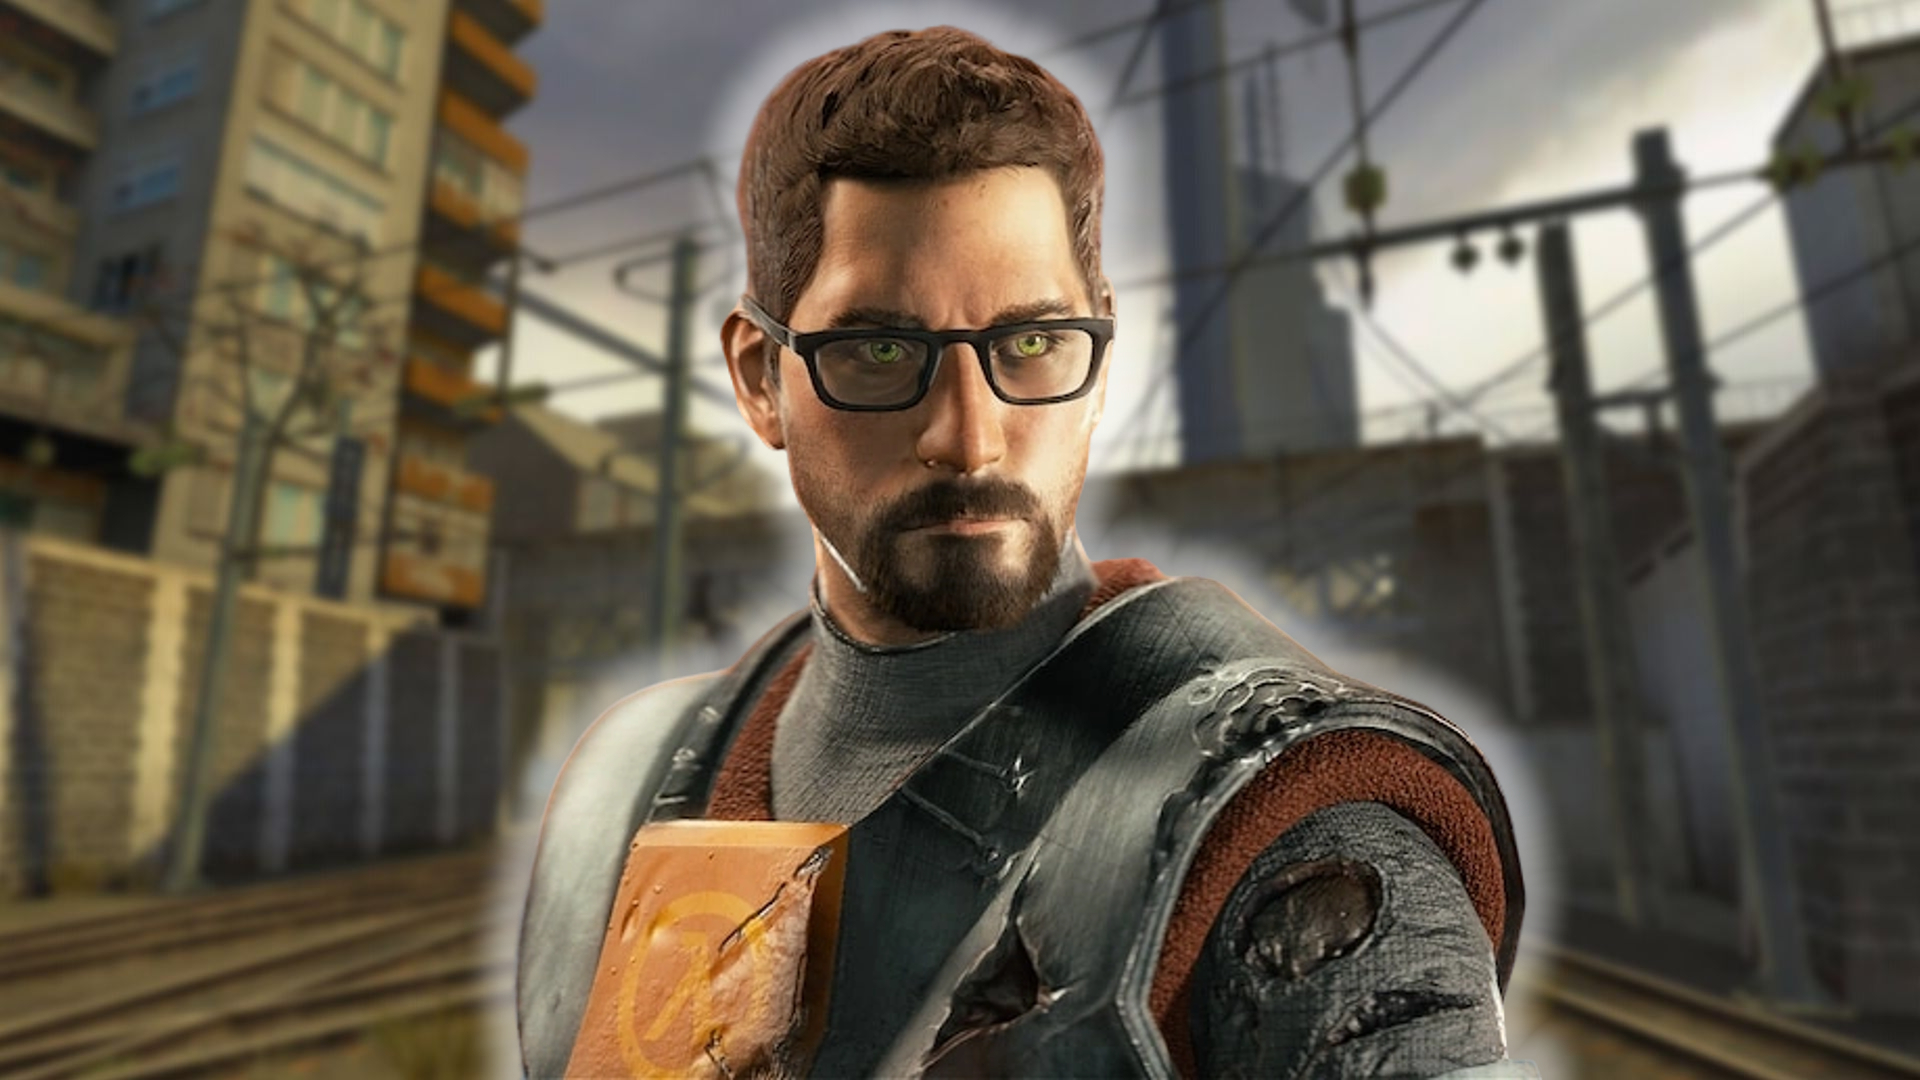 Half-Life 2 RTX to remaster “perfect image” you have of the original